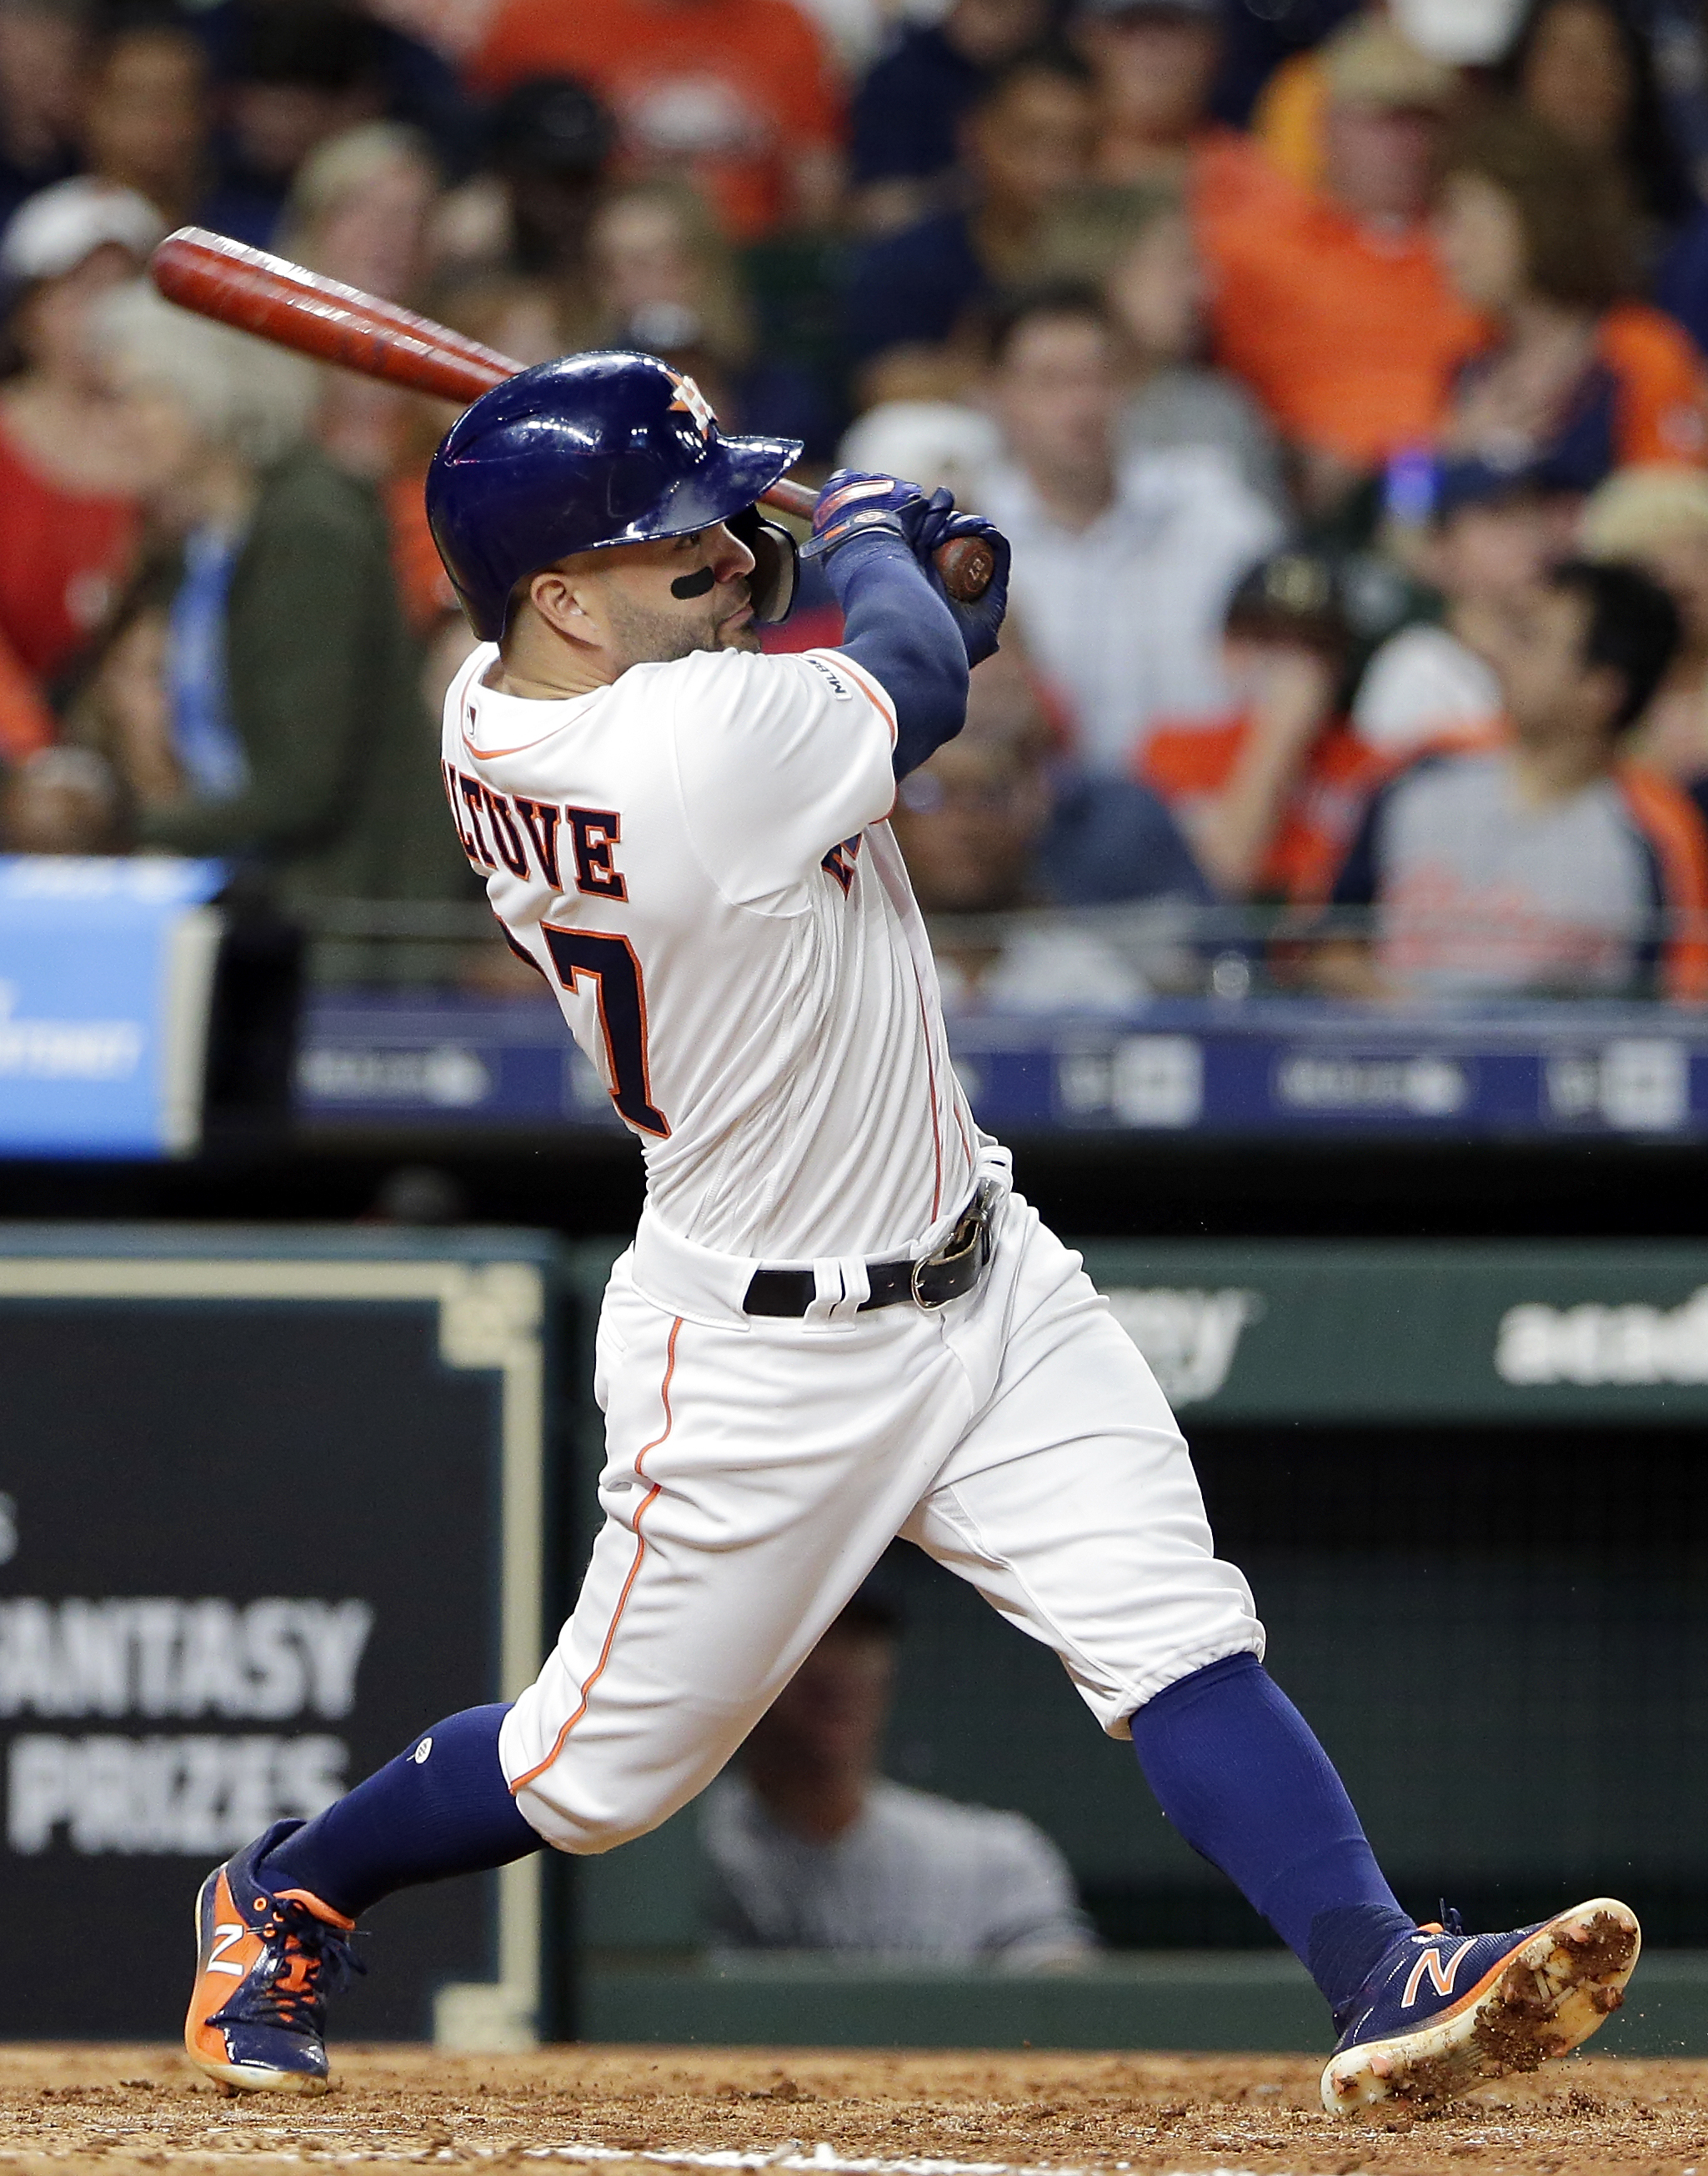 Altuve powers Astros to first-ever sweep of Yankees